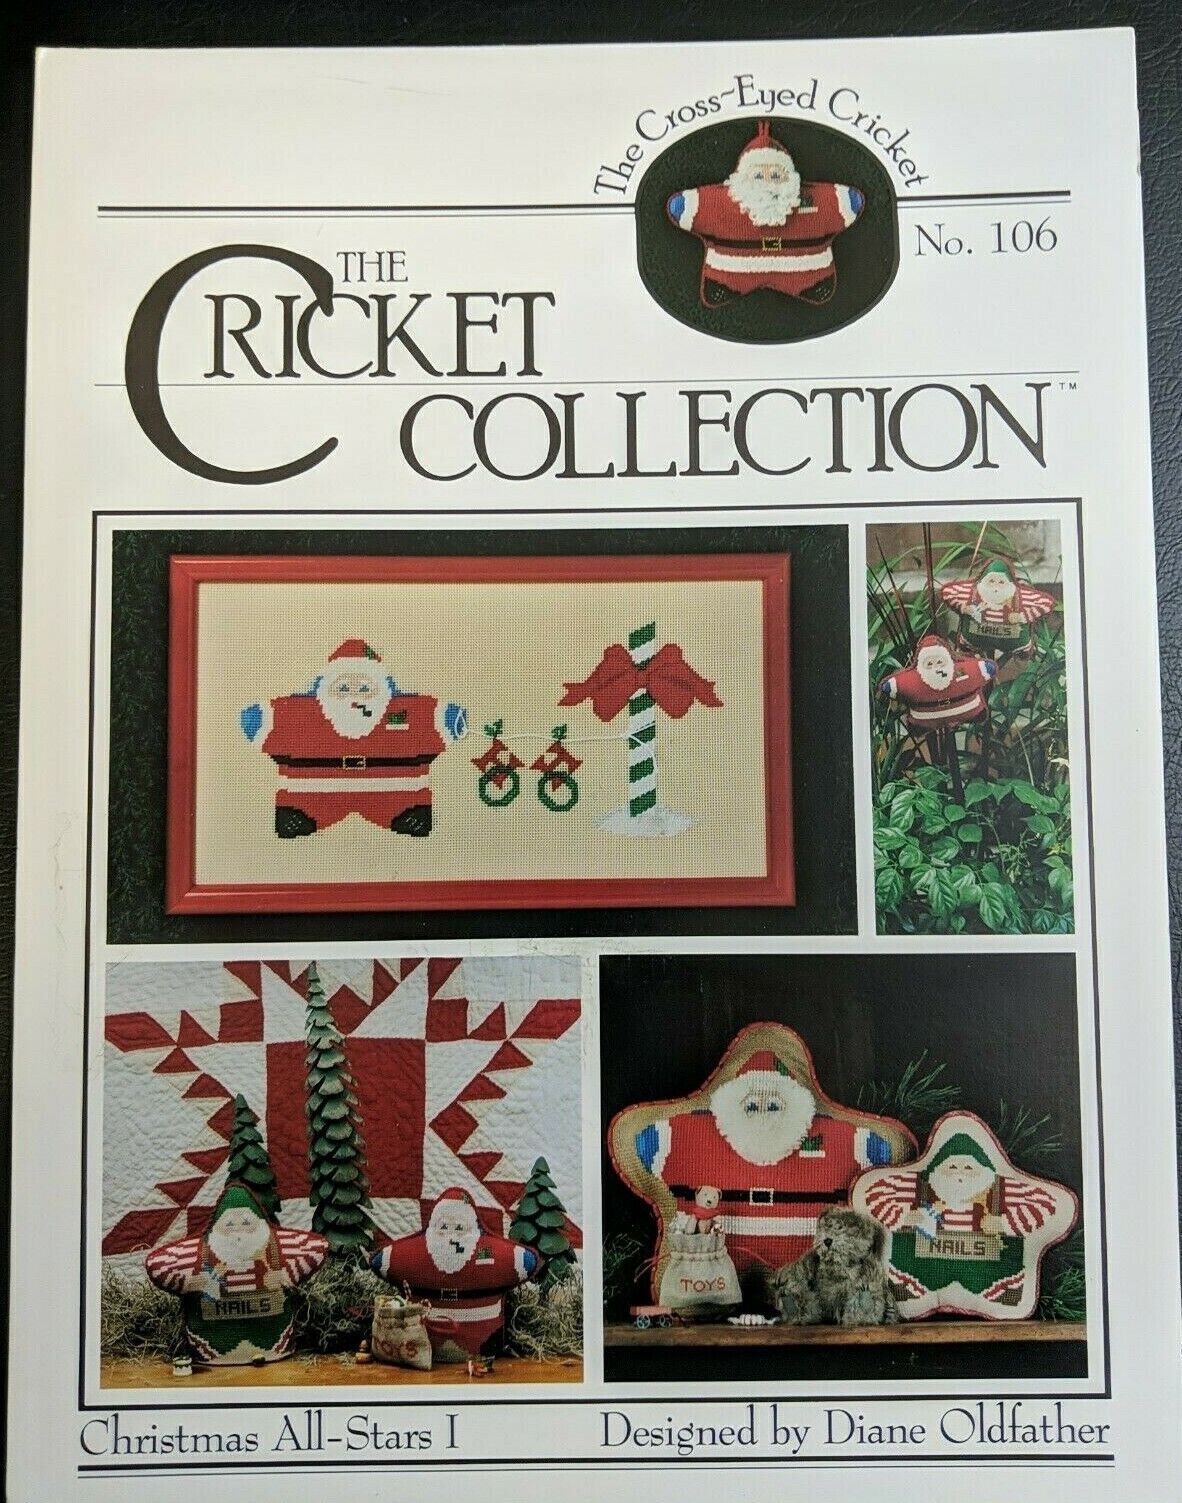 Christmas All-Stars I By The Cricket Collection